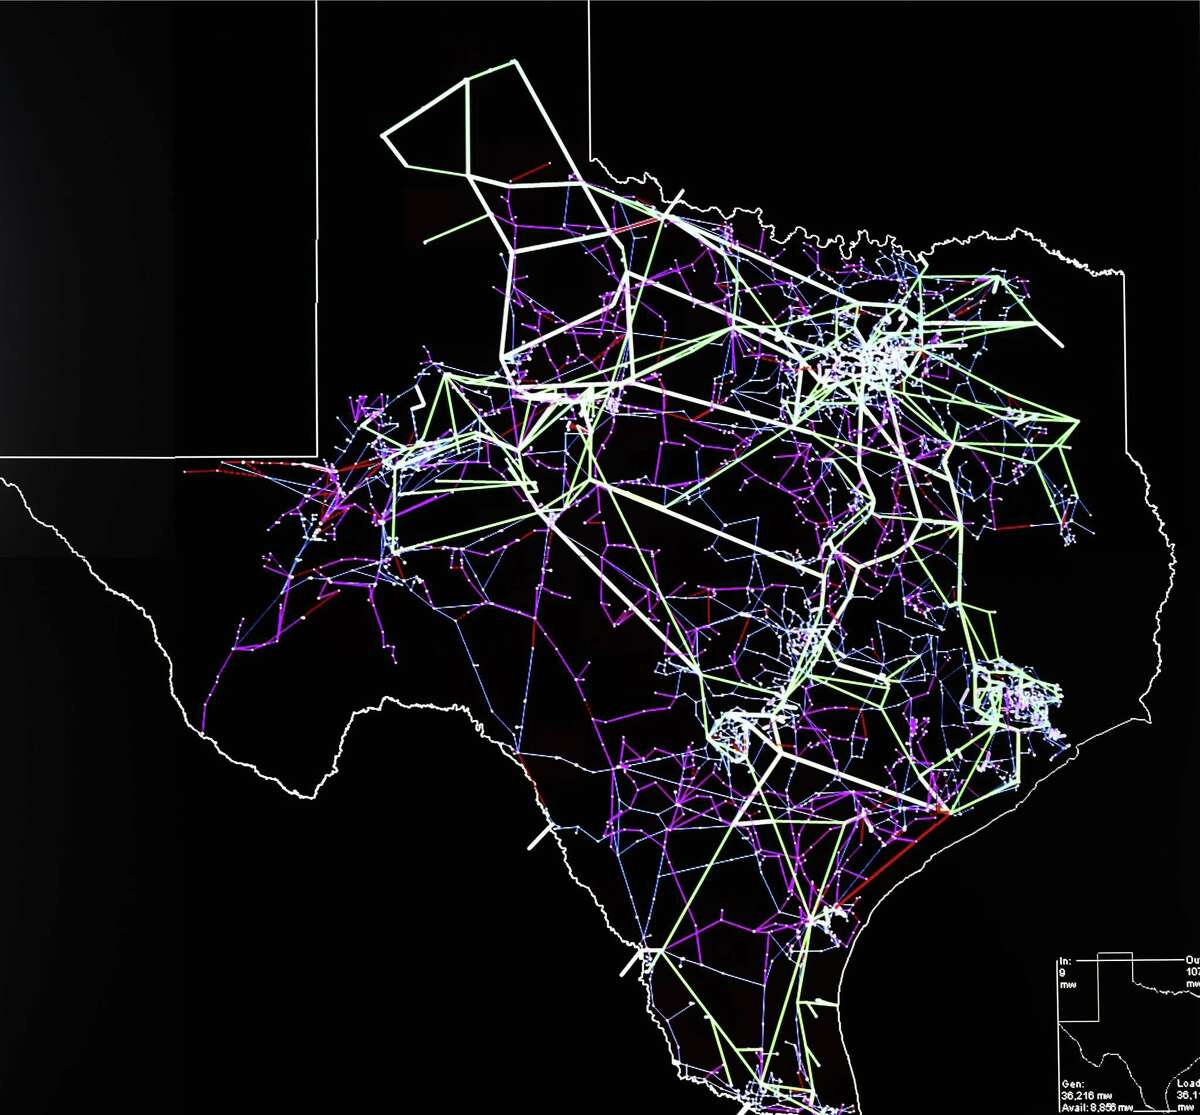 ERCOT says the Texas power grid is under 'tight conditions'